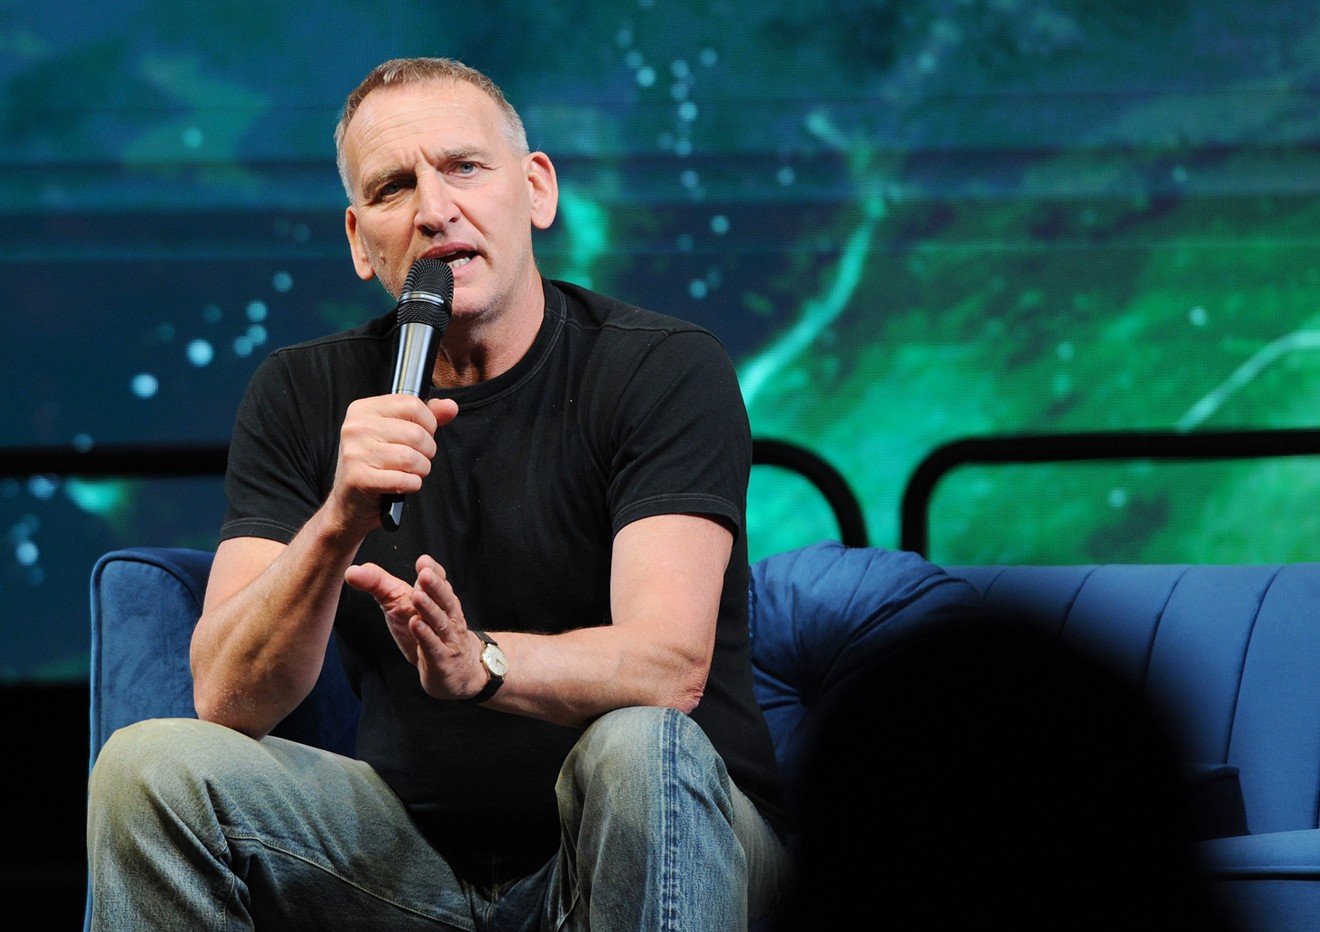 "Doctor Who" actor Christopher Eccleston during his Q&A at Phoenix Fan Fusion 2023.